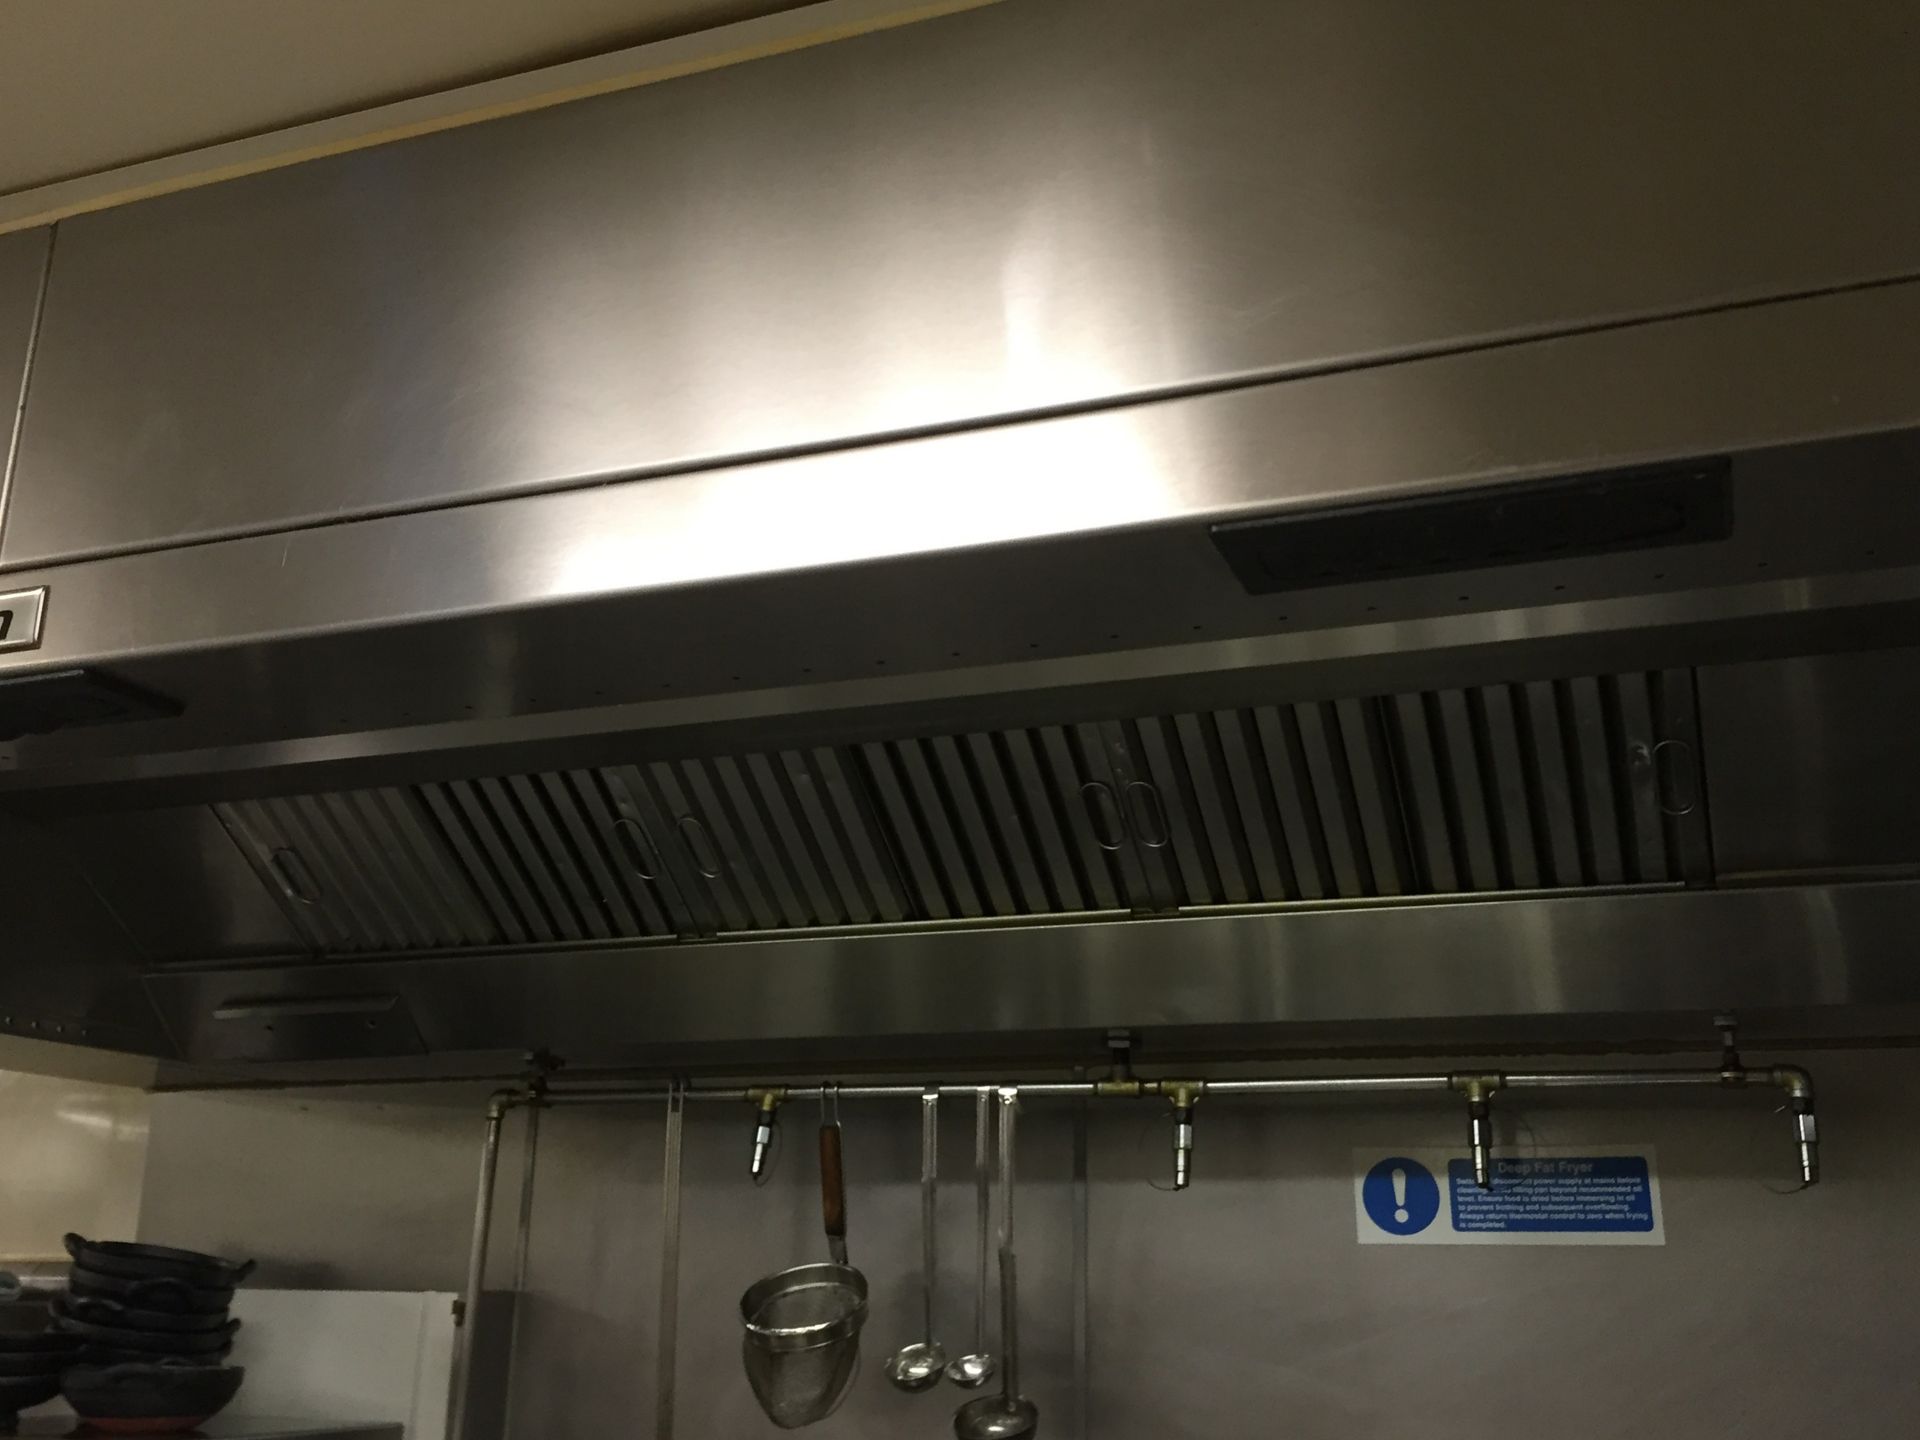 1 x Halton Stainless Steel Commercial Extractor Hood With Filters - Dimensions: 1248cm x 148cm x - Image 5 of 5